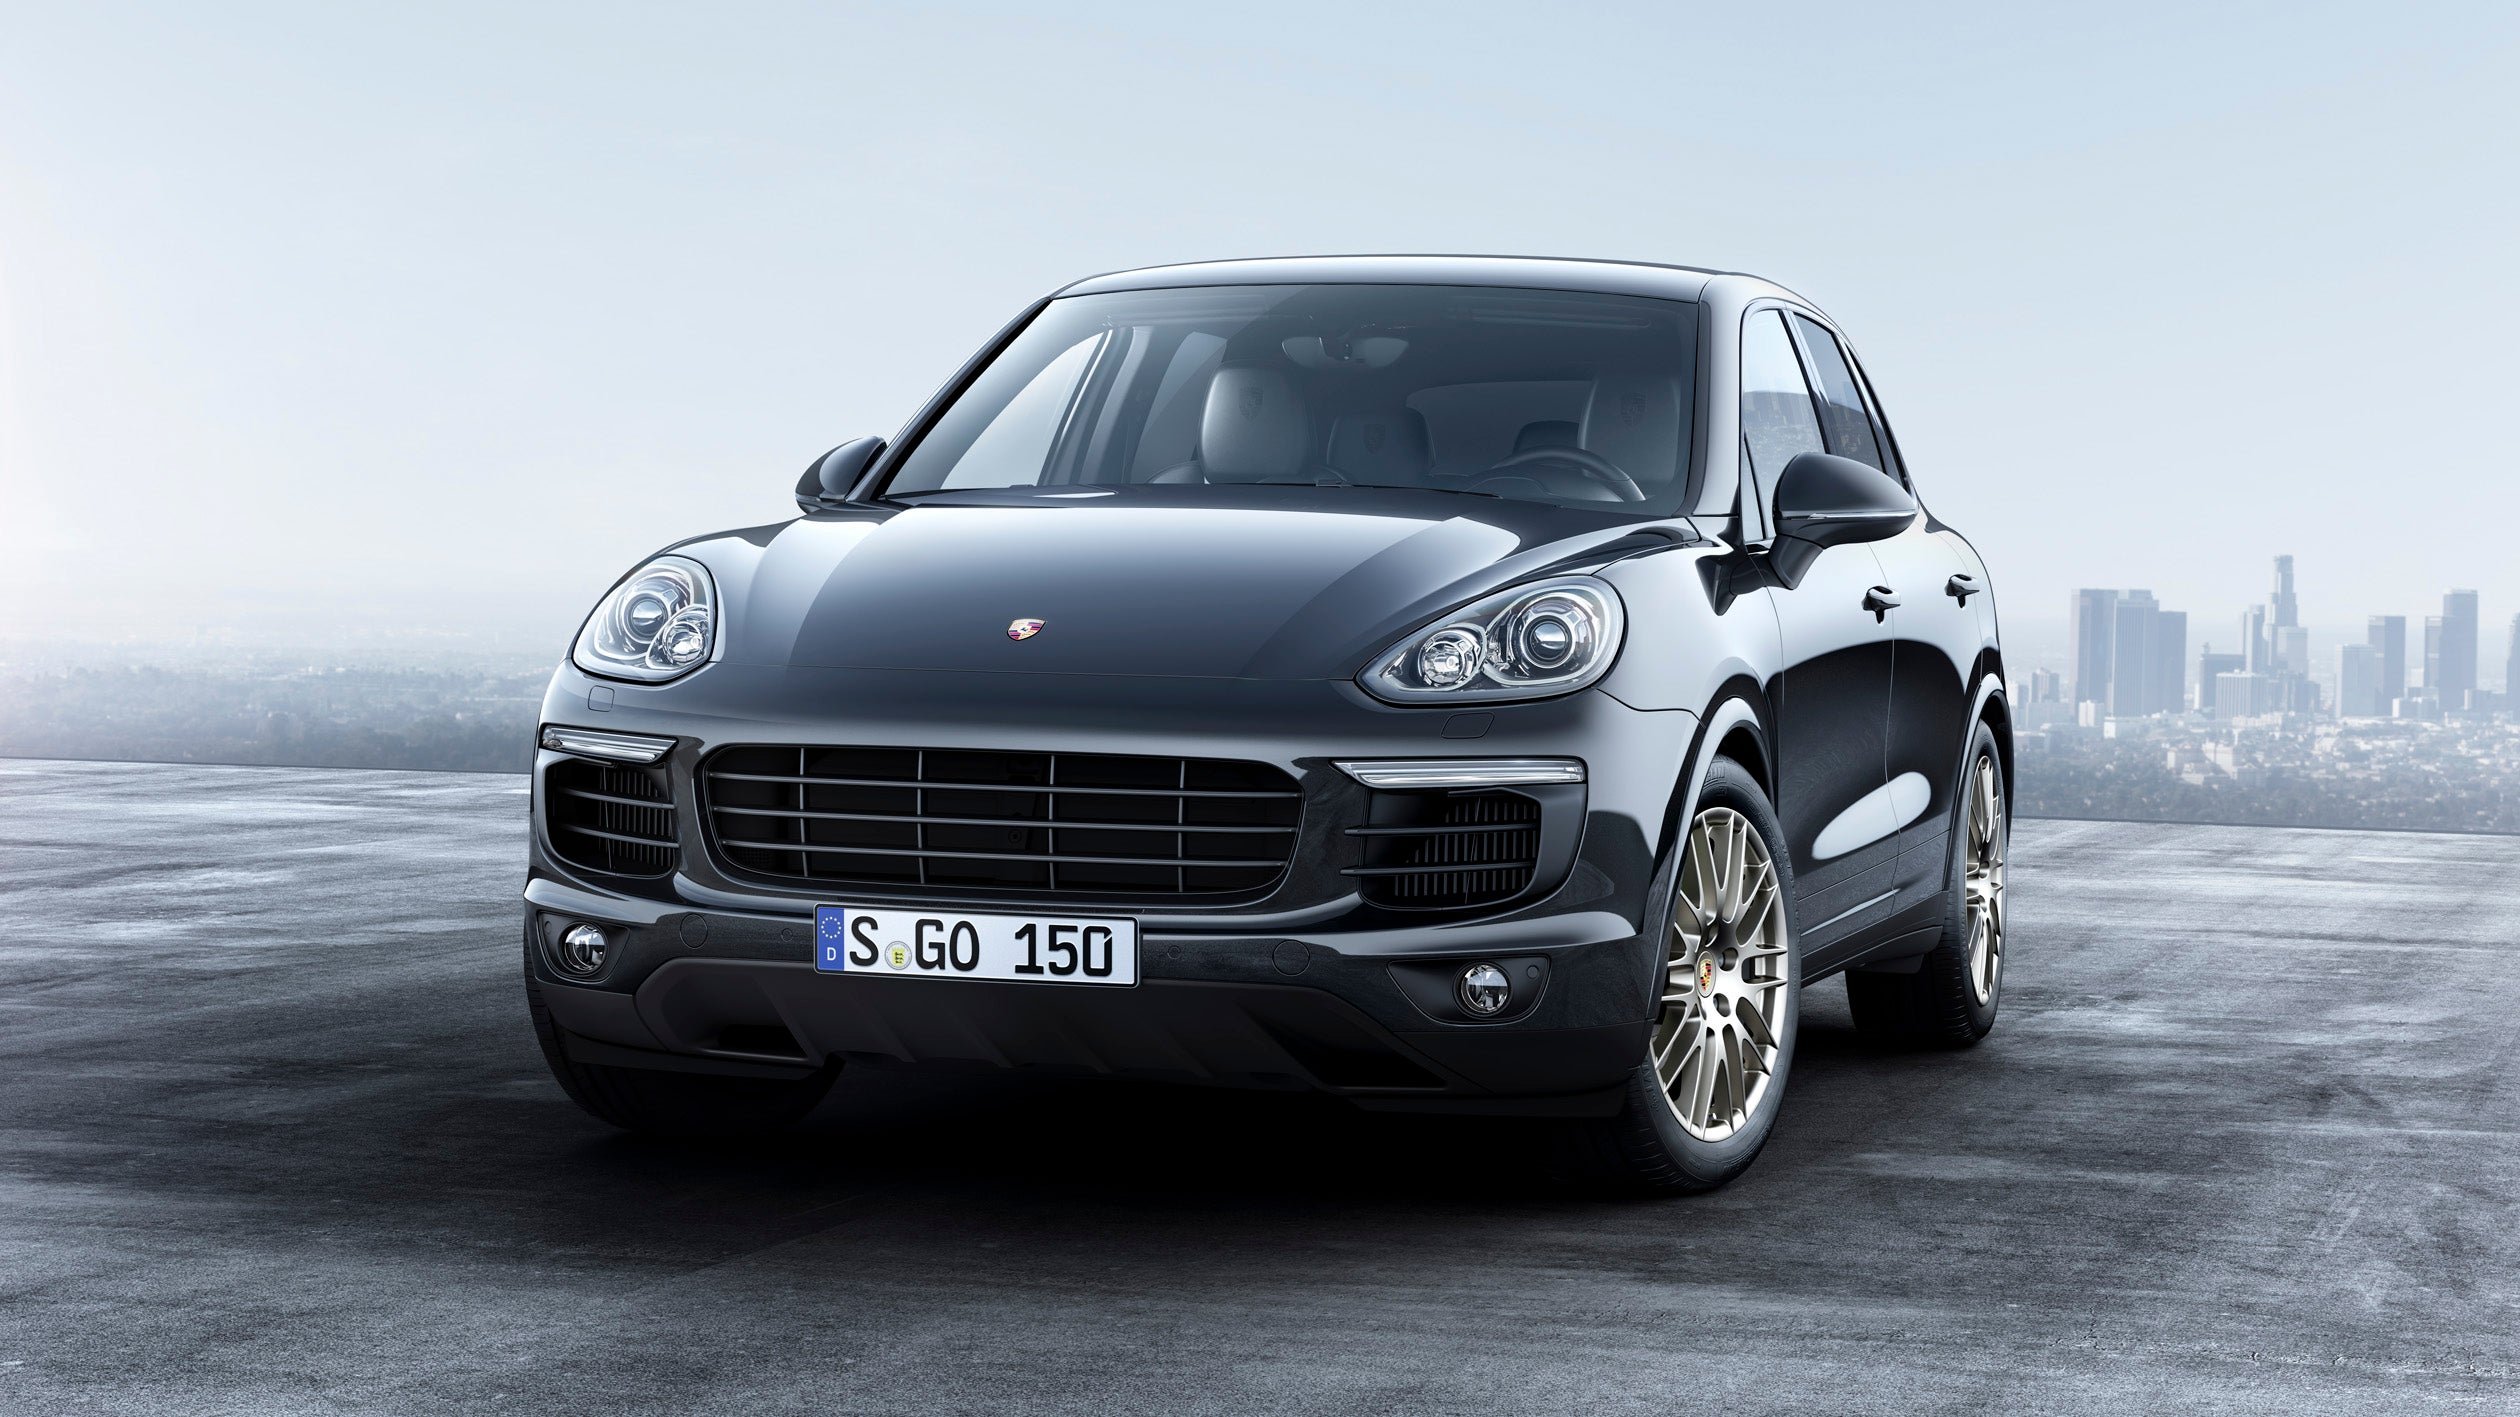 What the experts say about the 2017 Porsche Cayenne